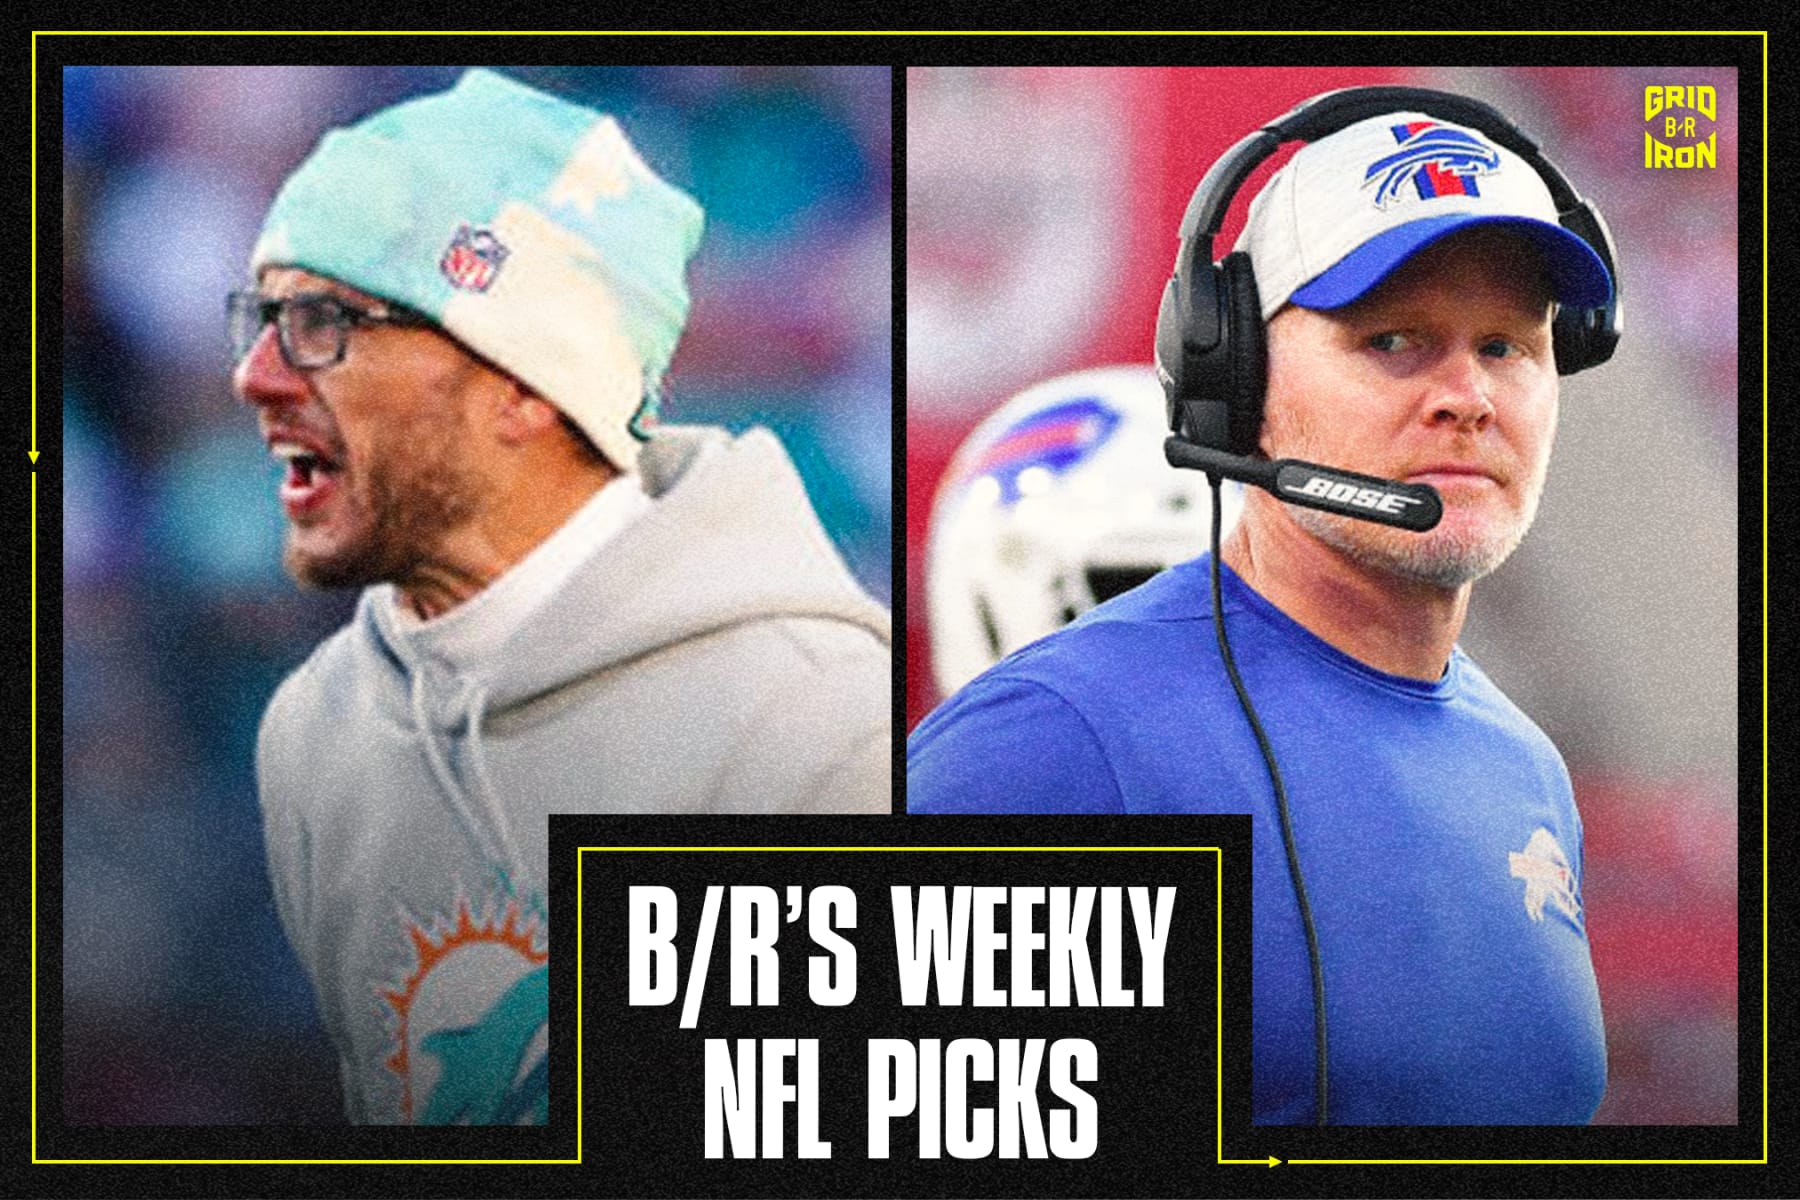 picks for this week